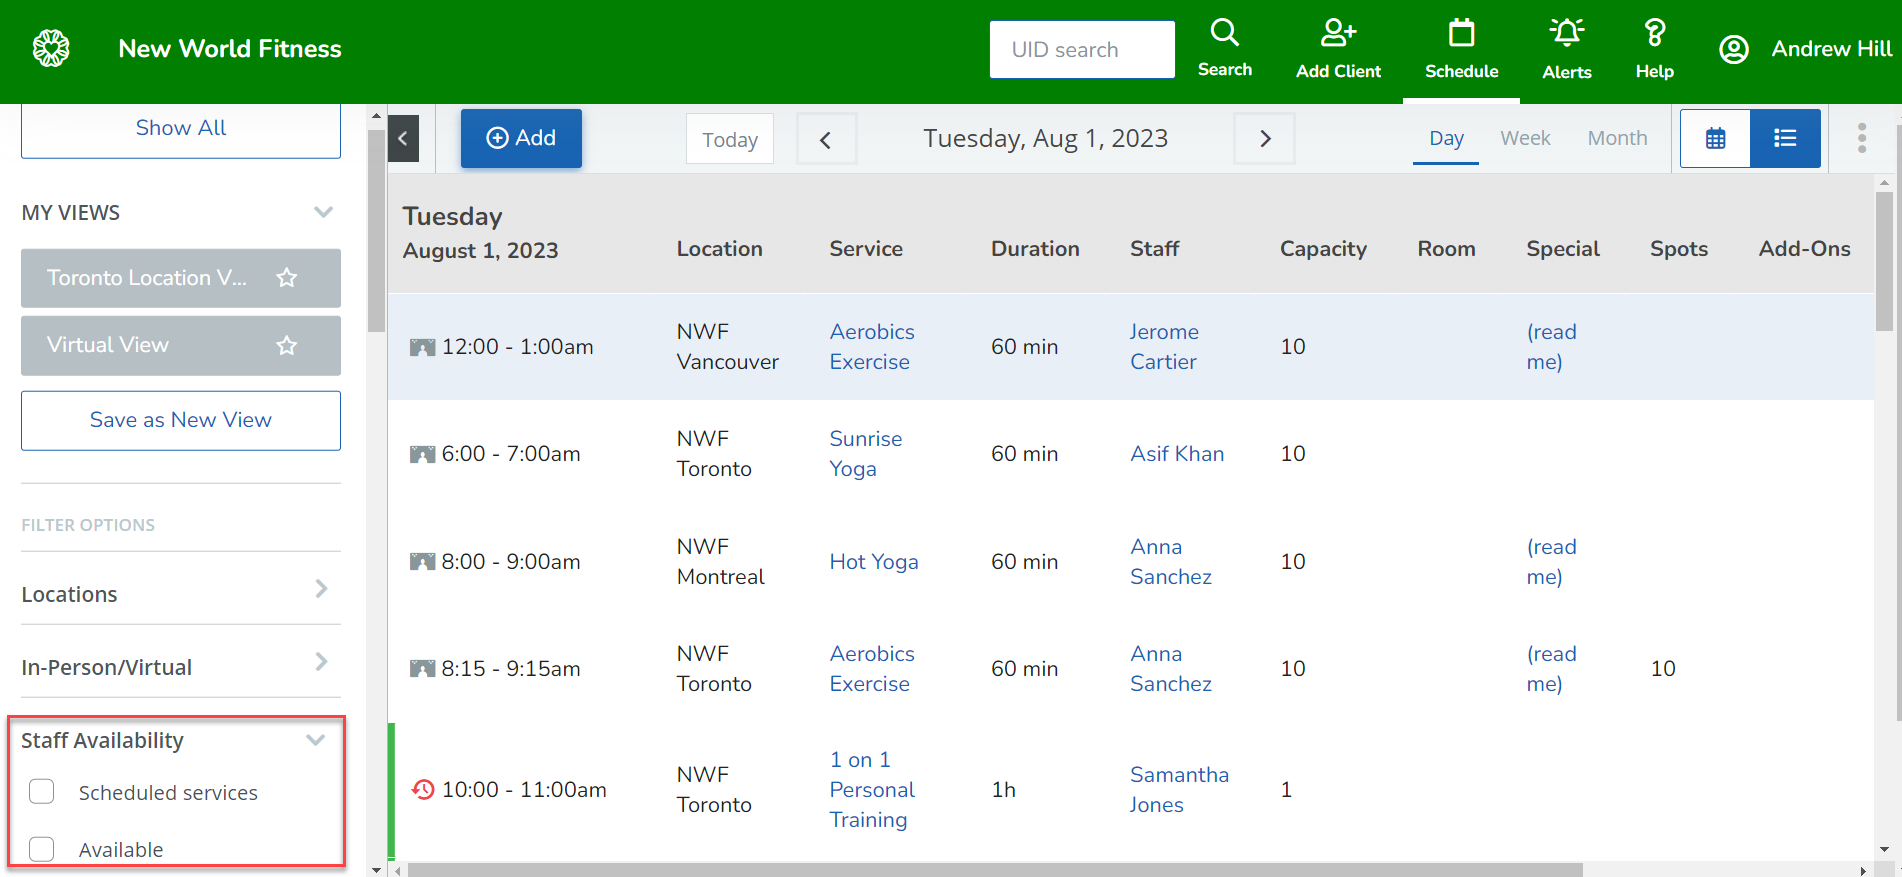 A screenshot of the new Staff Availability filter on the schedule.